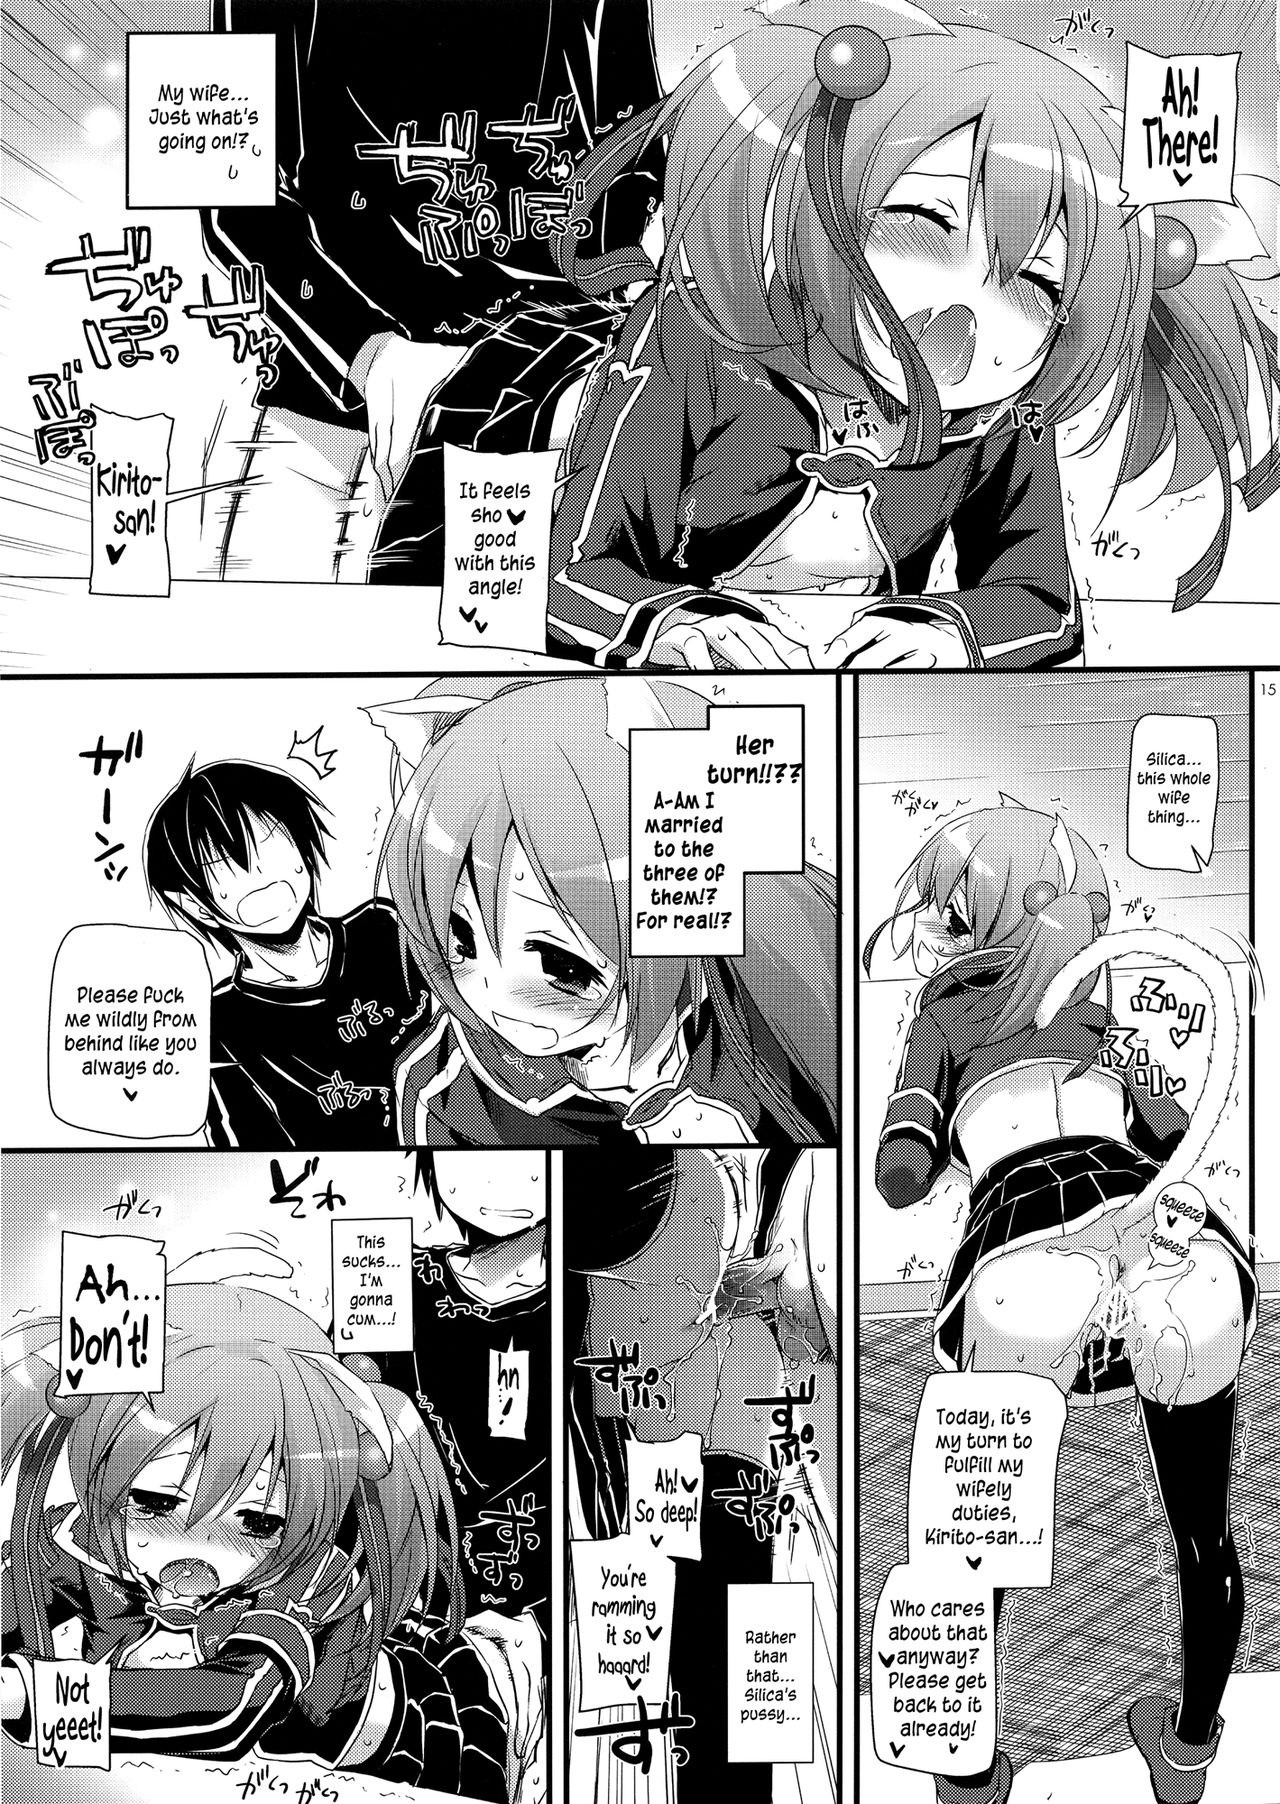 D.L. Action 72 hentai manga picture 14